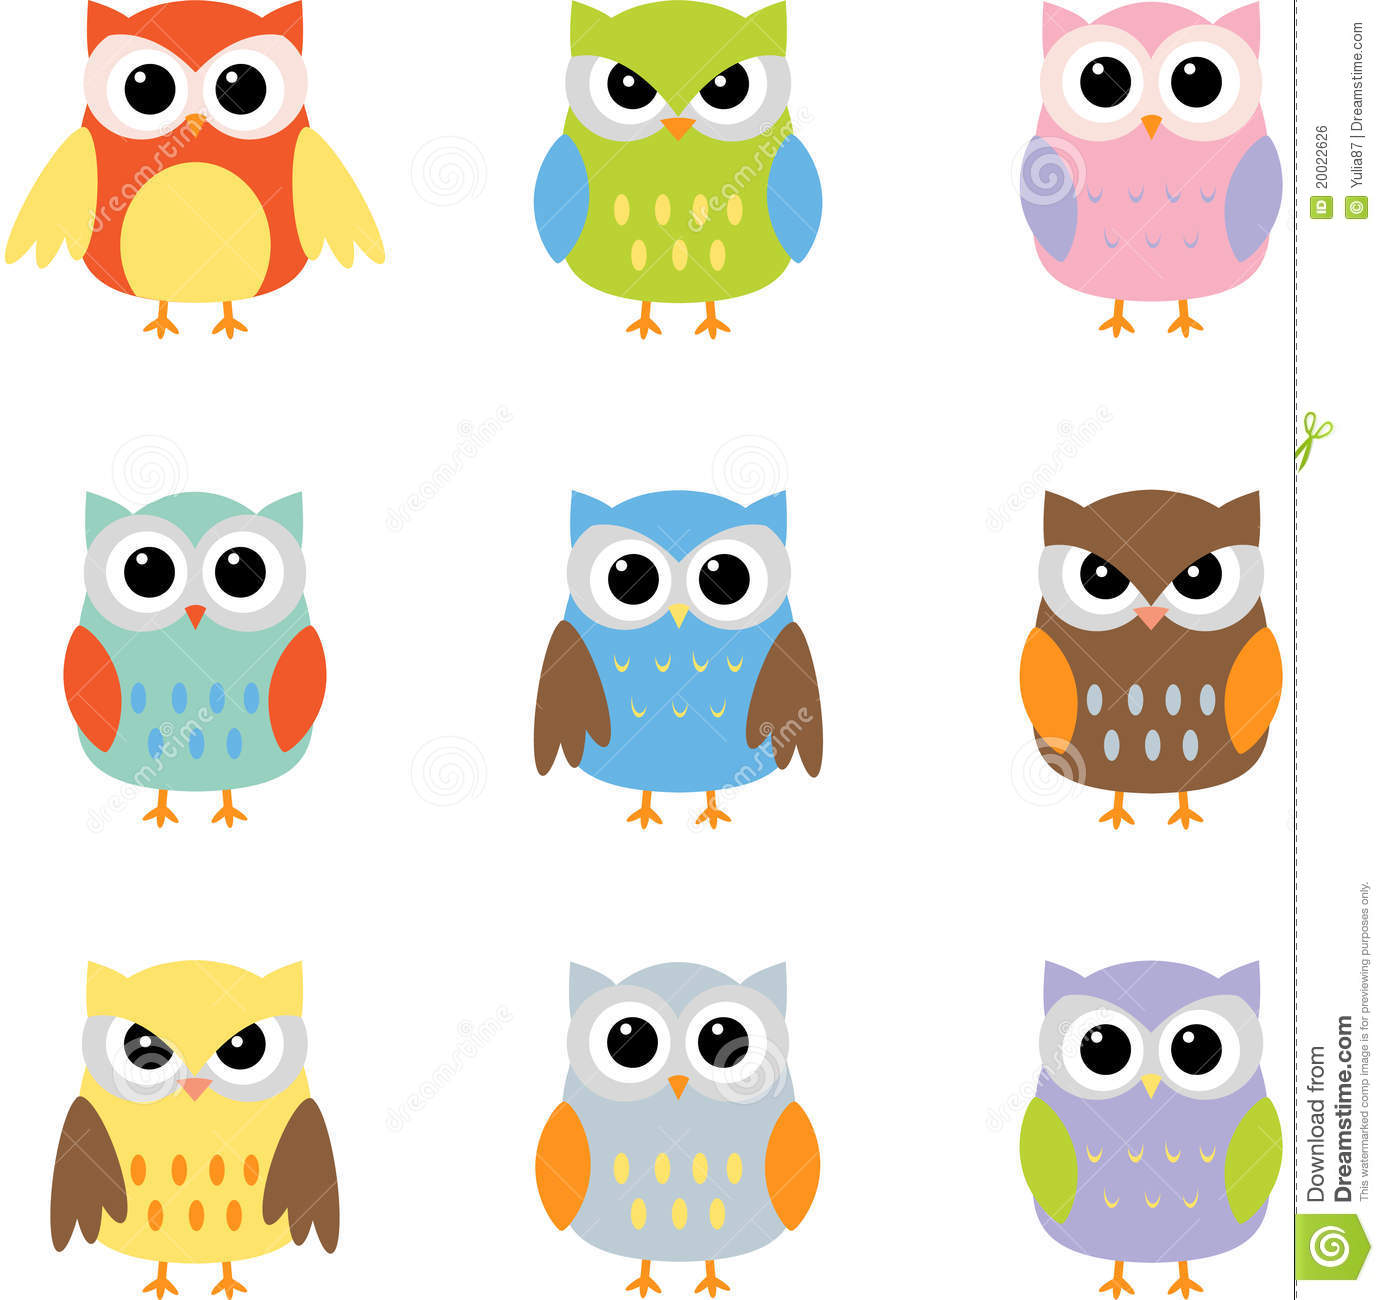 Color owls clip art royalty free stock image image image #34